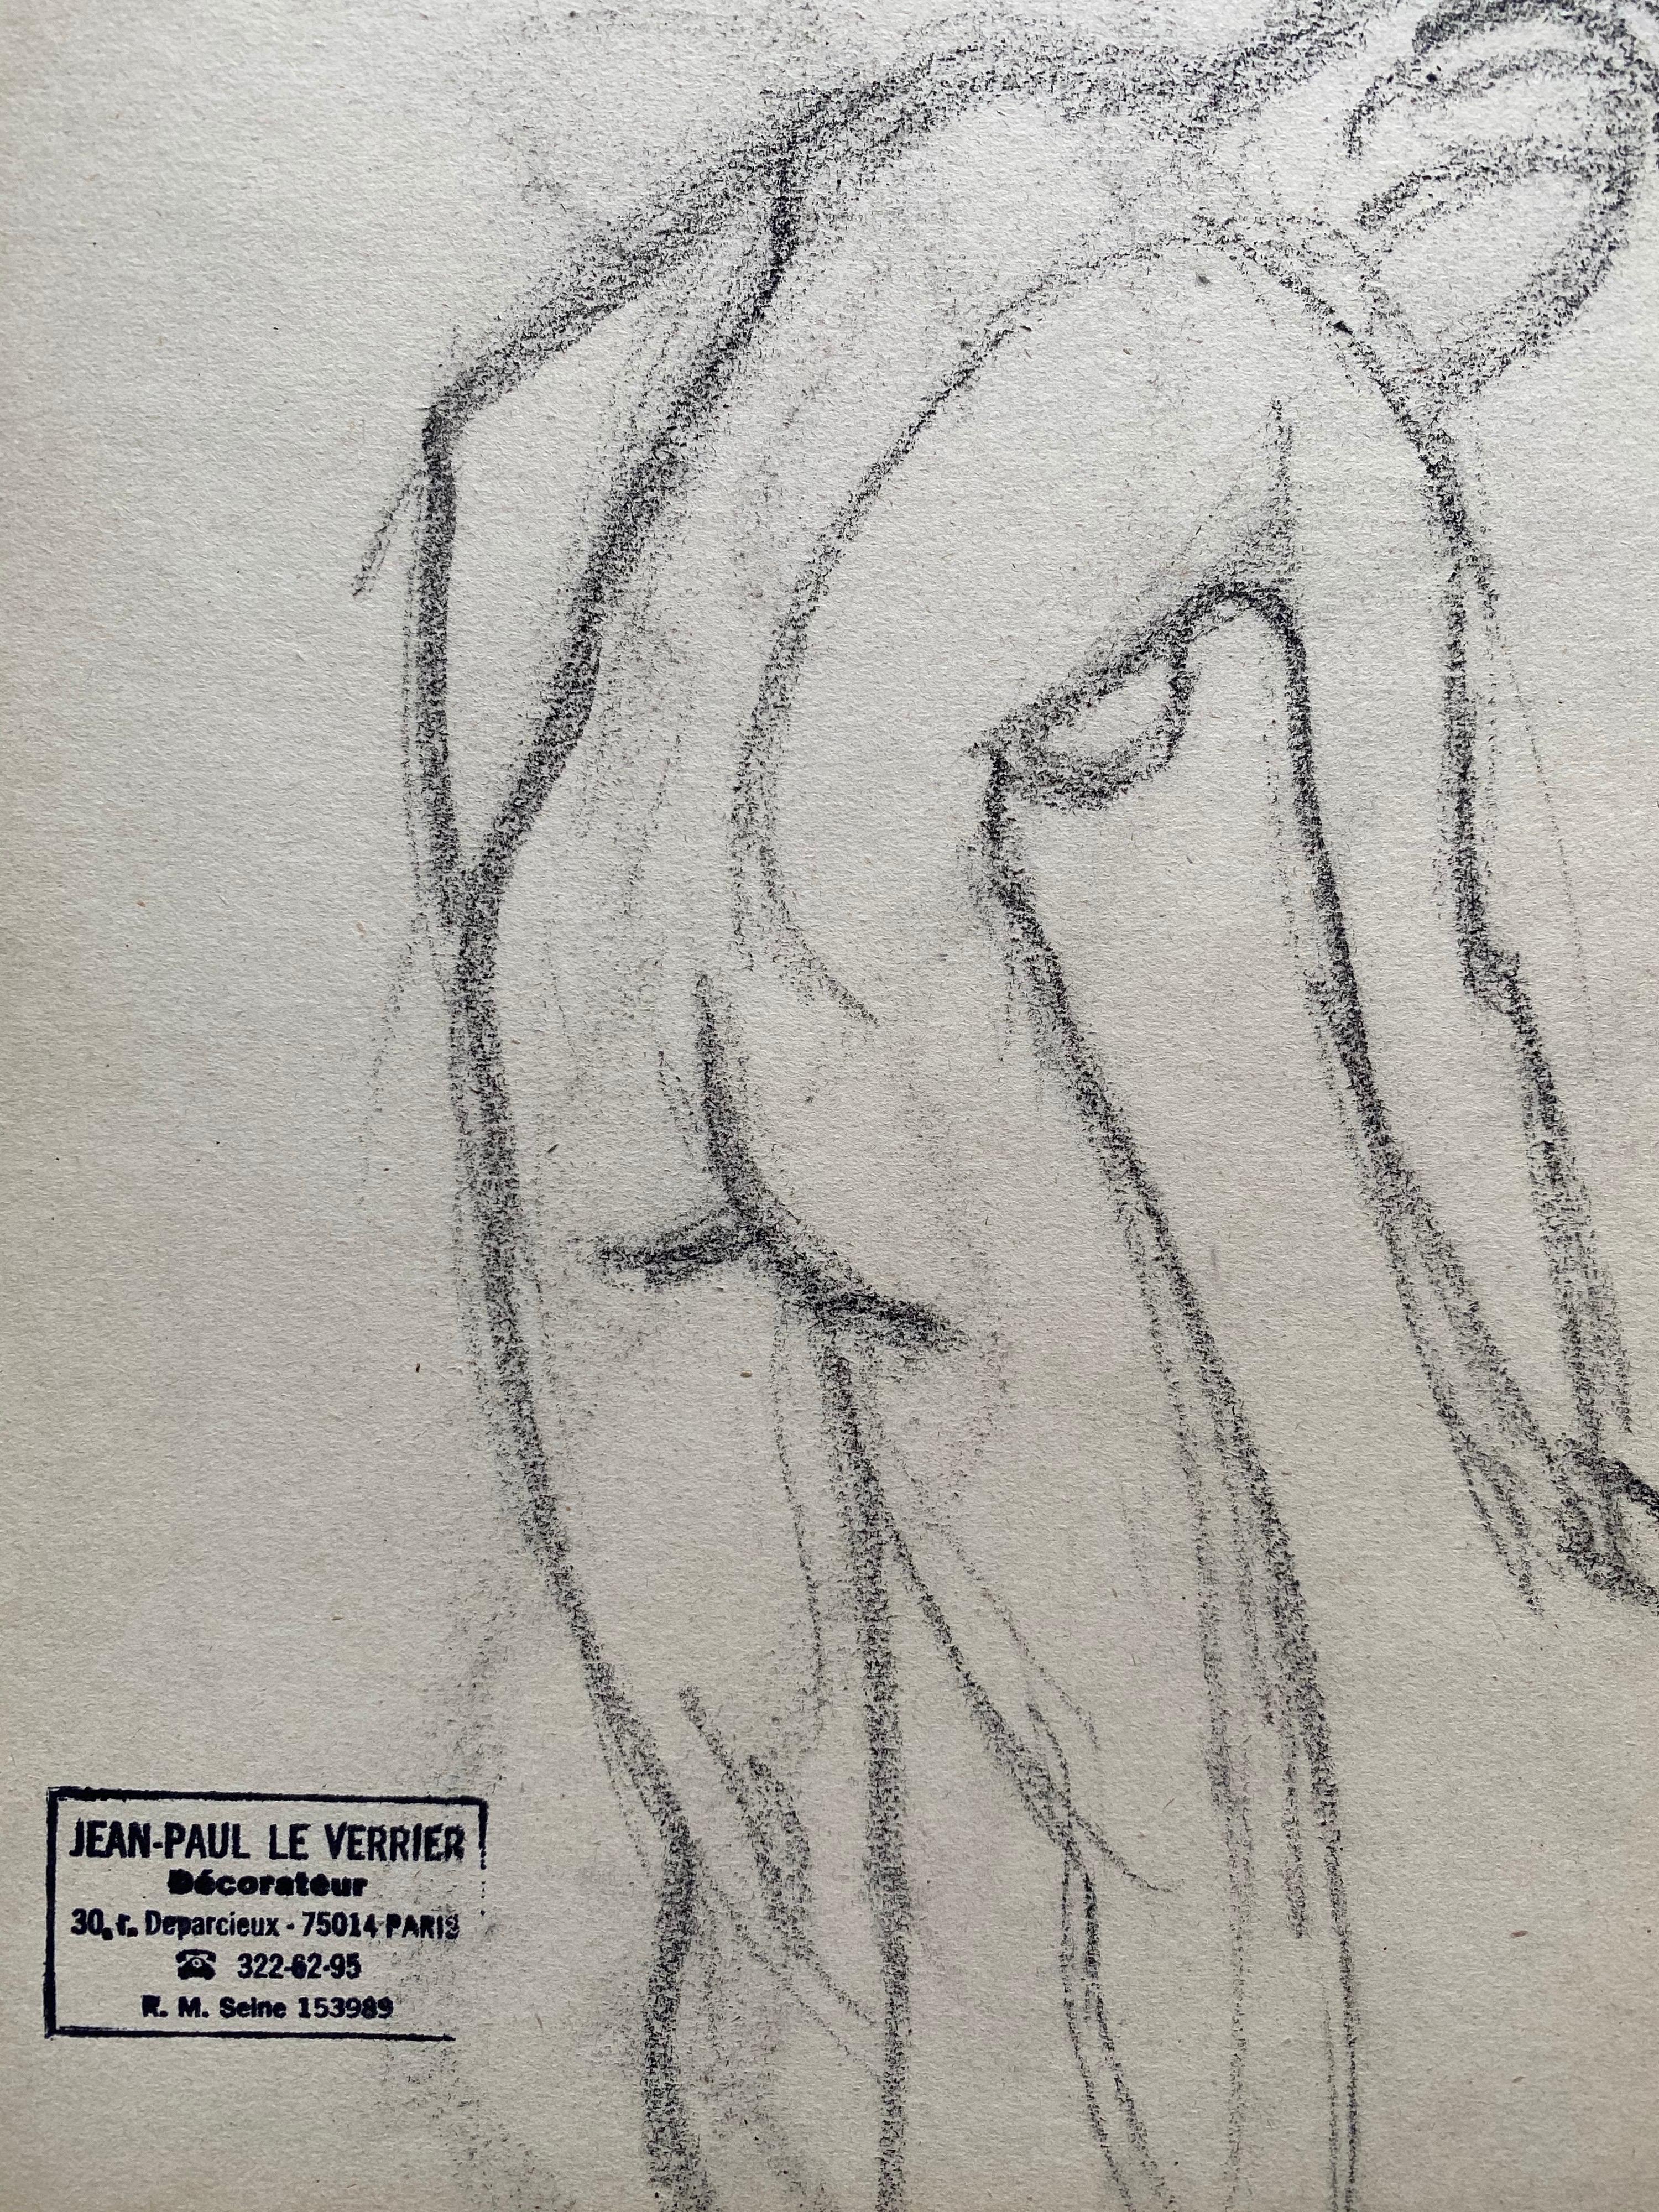 Jean-Paul le Verrier Figurative Art - Mid 20th century French Original Line Drawing sketch Nude Lady - Stamped